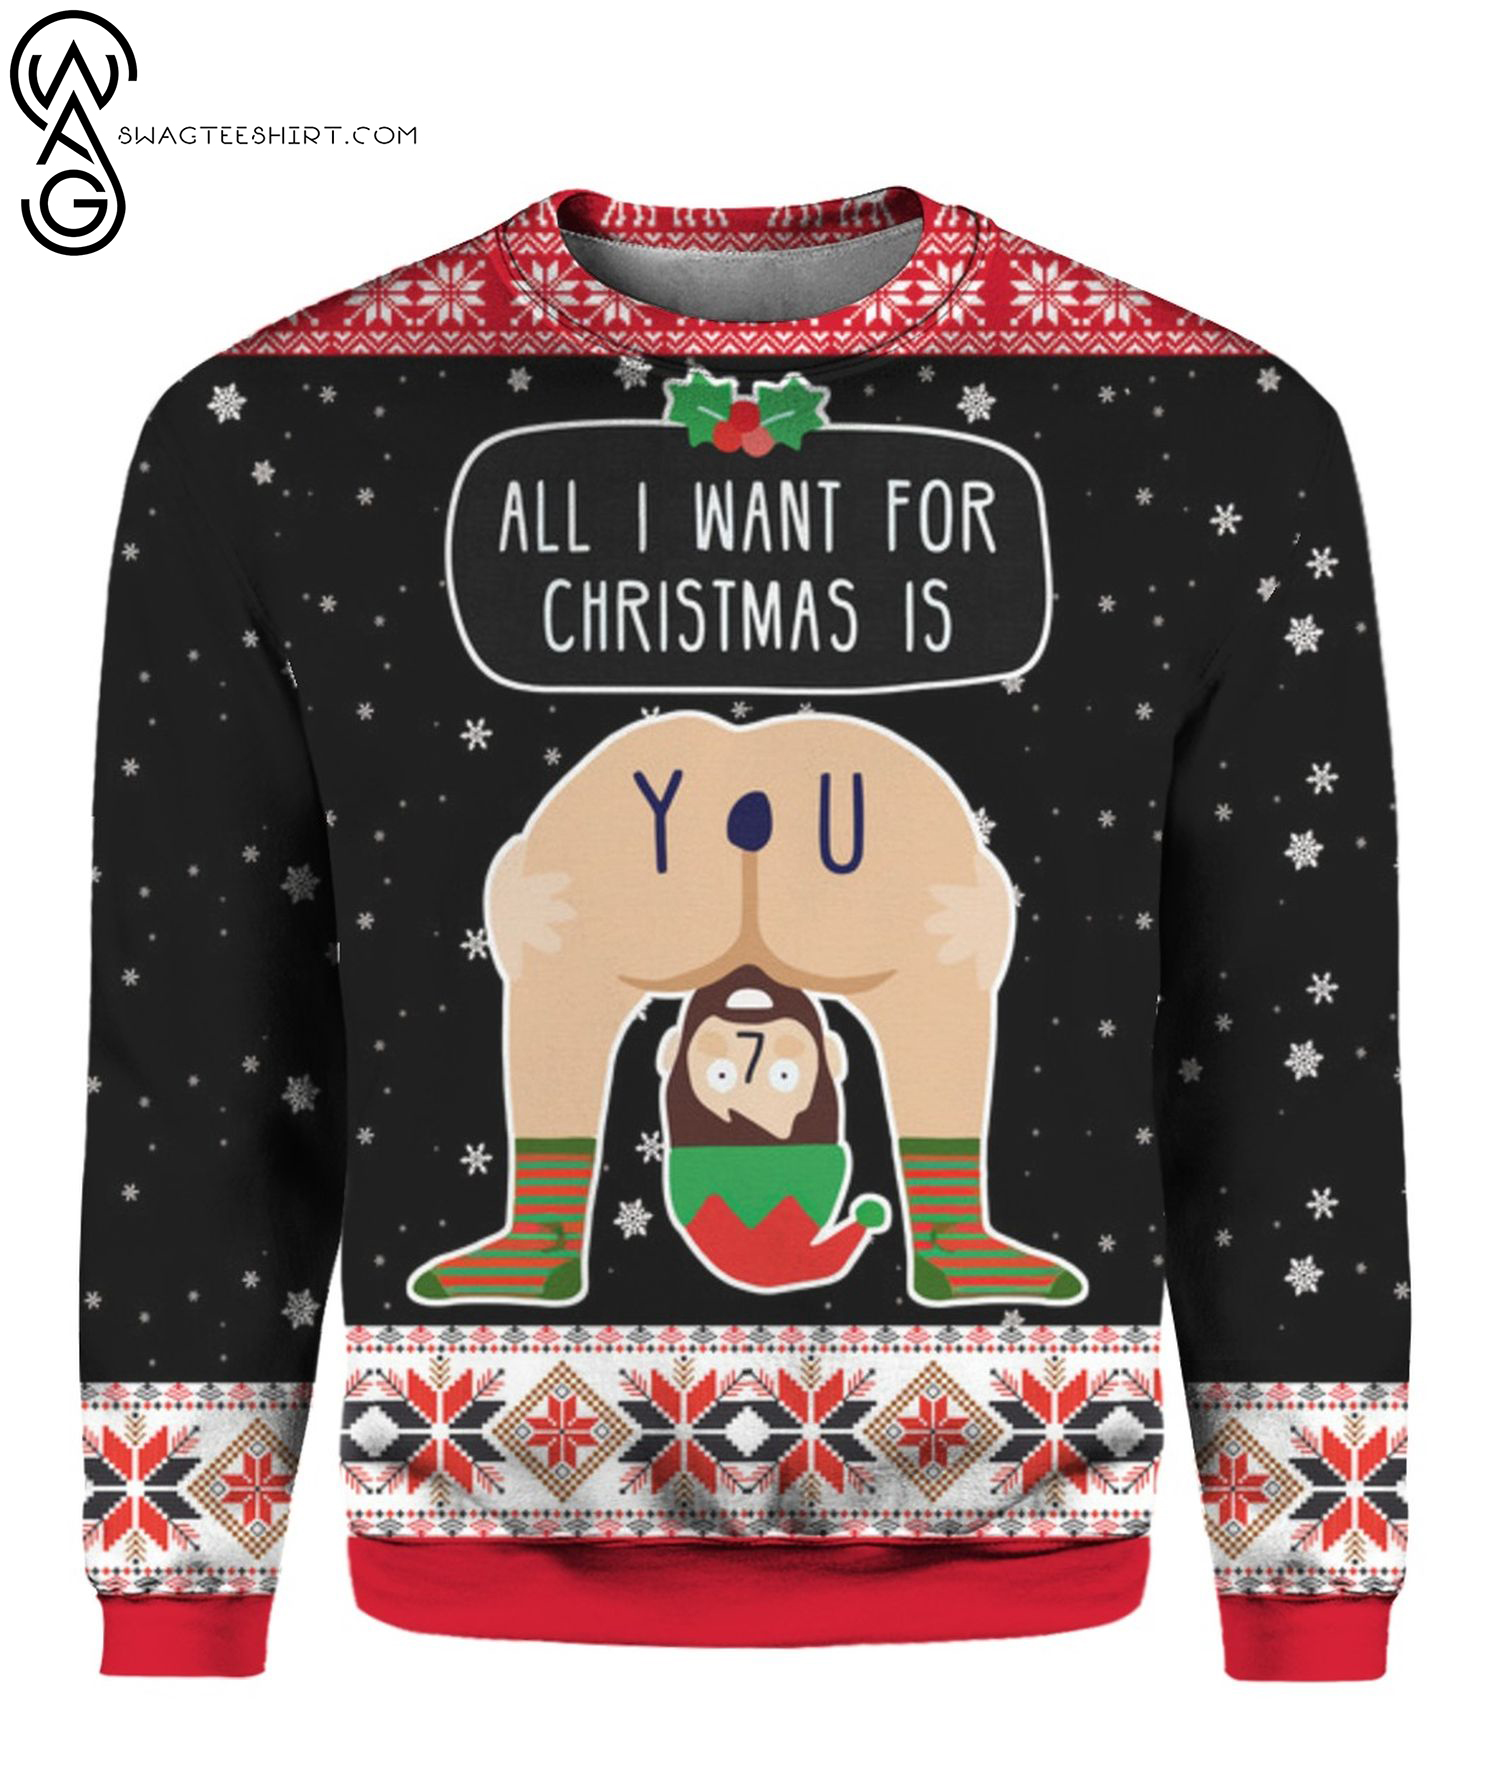 All I Want For Christmas Is You Full Print Ugly Christmas Sweater